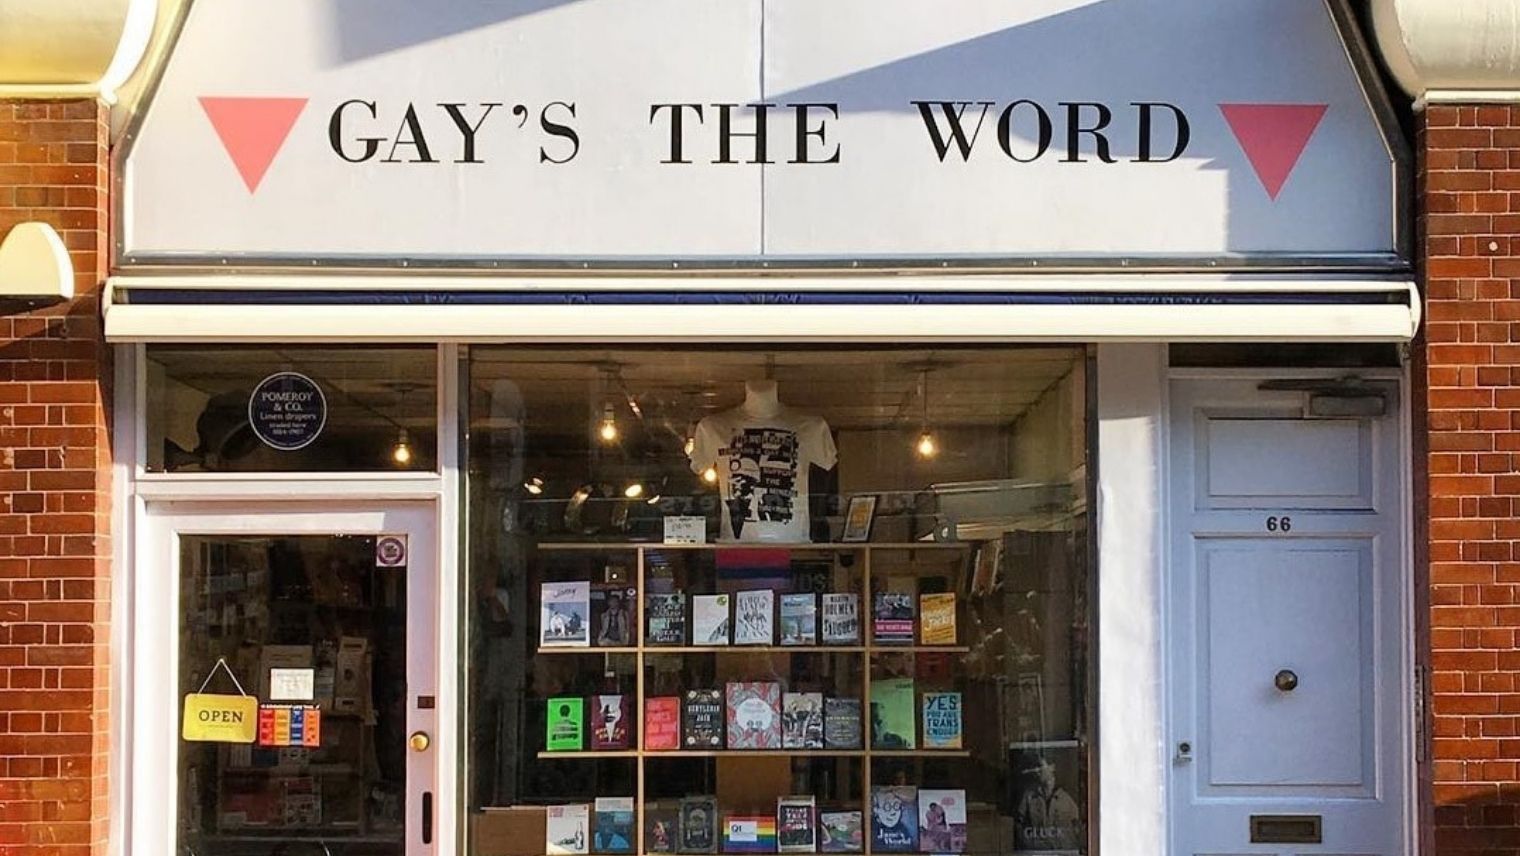 Exterior of Gay's the Word, London